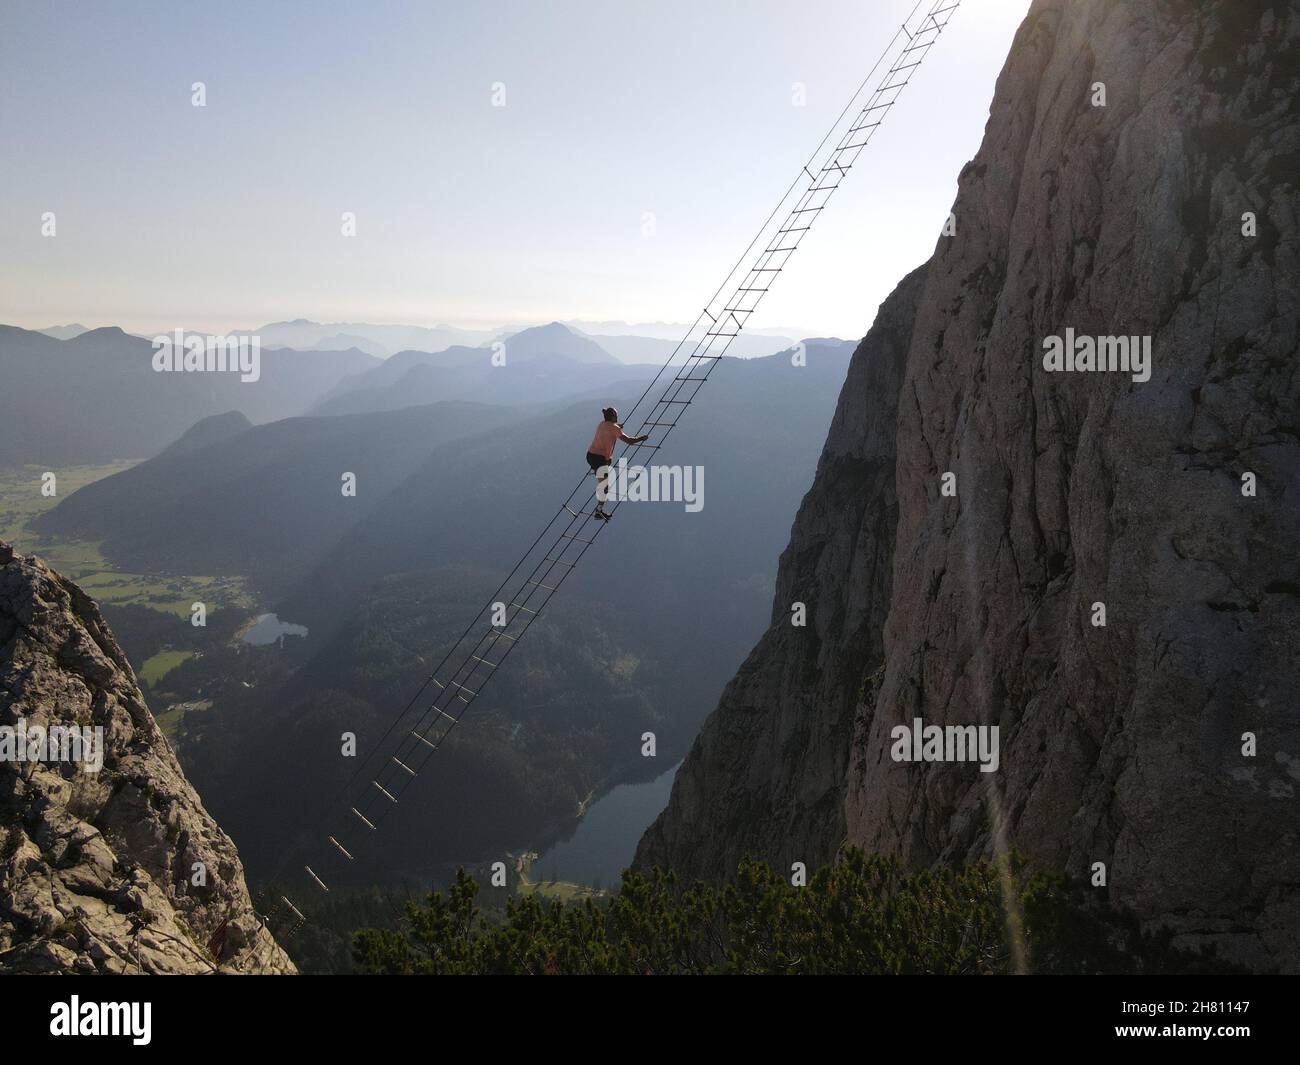 One of the most famous via ferratas in the world. The Intersport via ferrata on Donnerkogel in Austria. A man climbs to the other side of the mountain Stock Photo